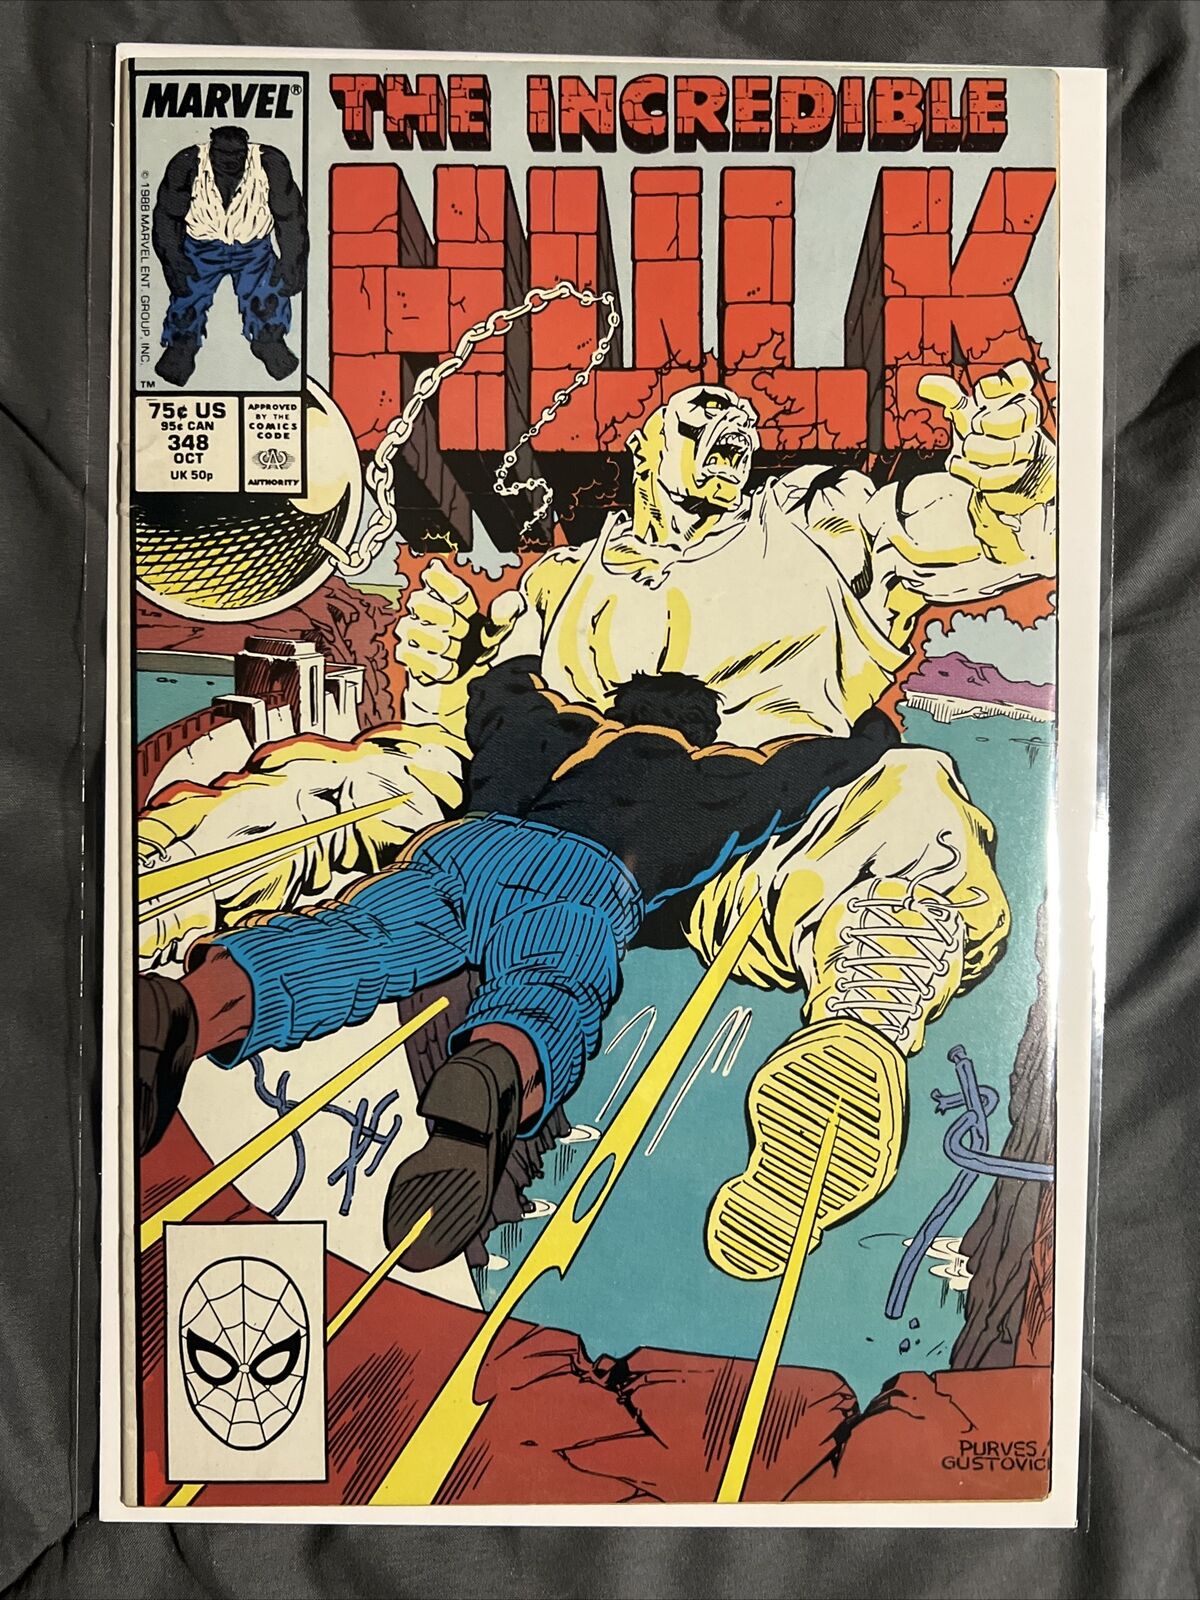 The Incredible Hulk 348 1988 Marvel Comics Bagged and Boarded